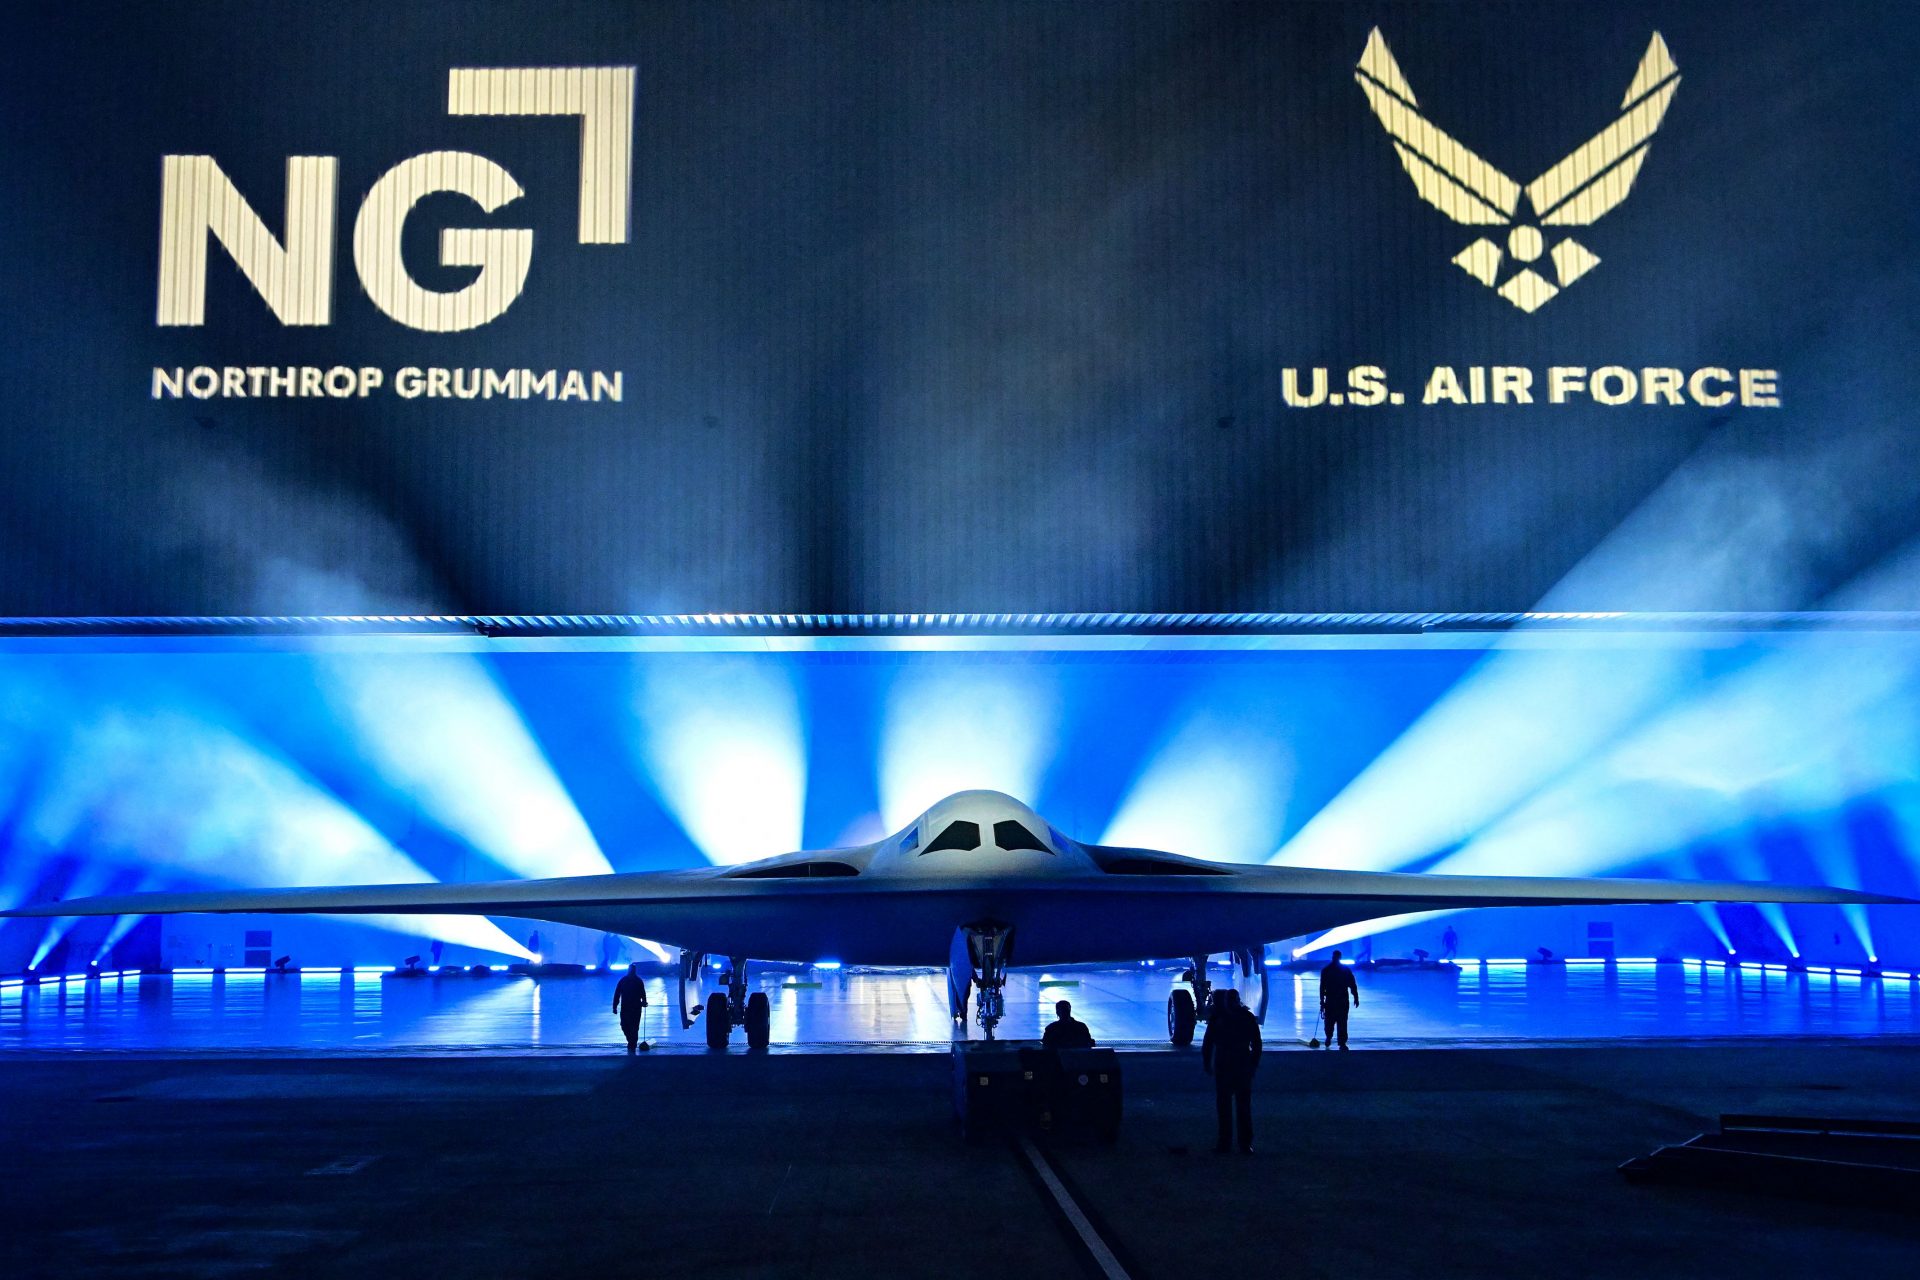 America's new game-changing stealth bomber has entered production